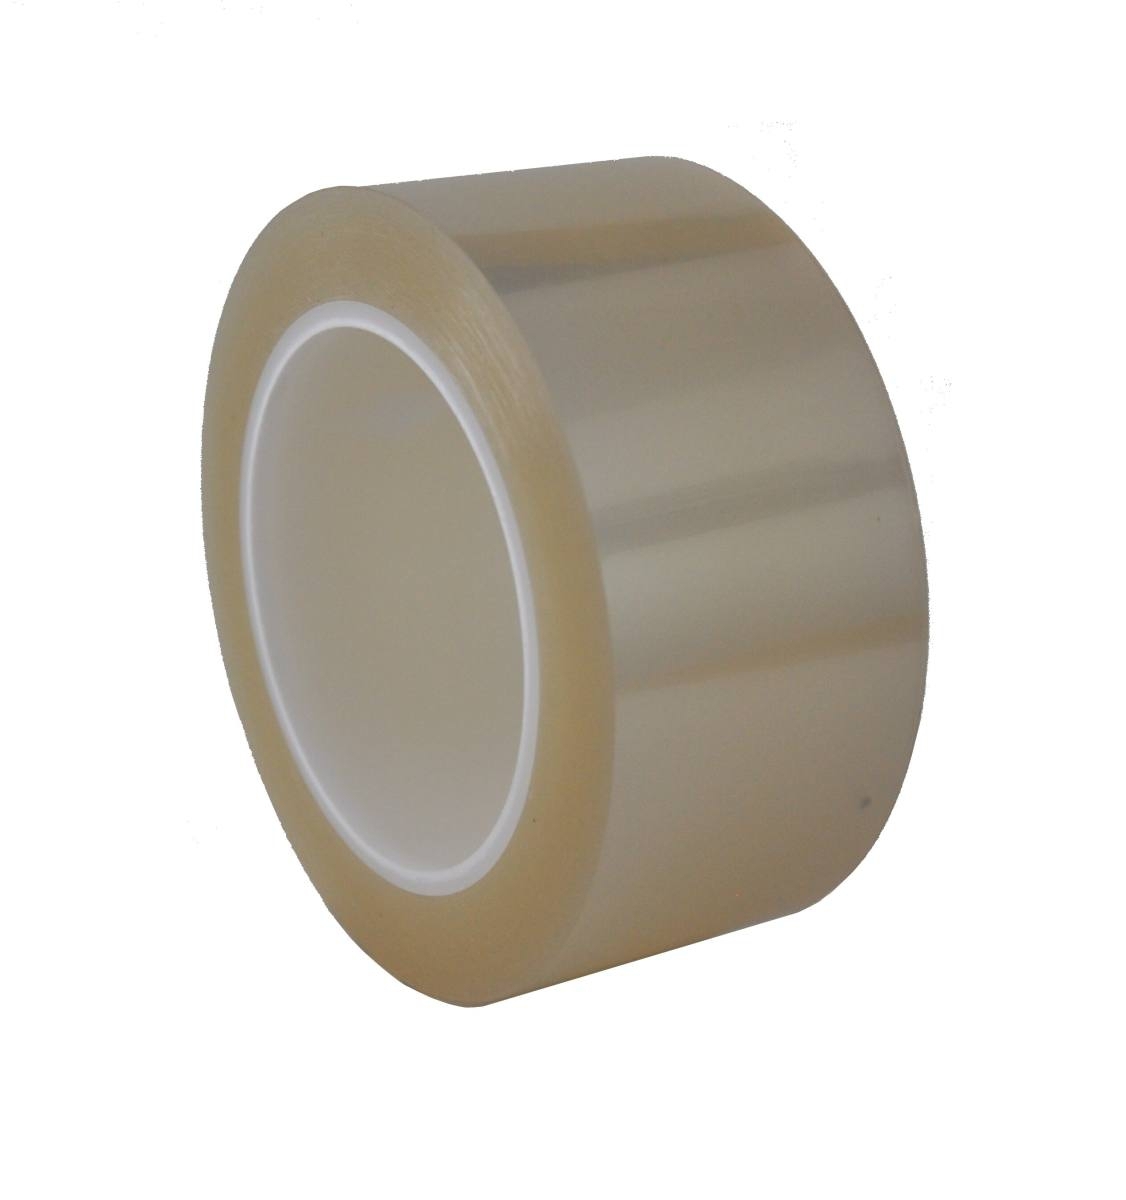 SKS fluorosilicone film, polyester film 0.075mm, 250mmx100m, coated on one side with fluorosilicone, transparent